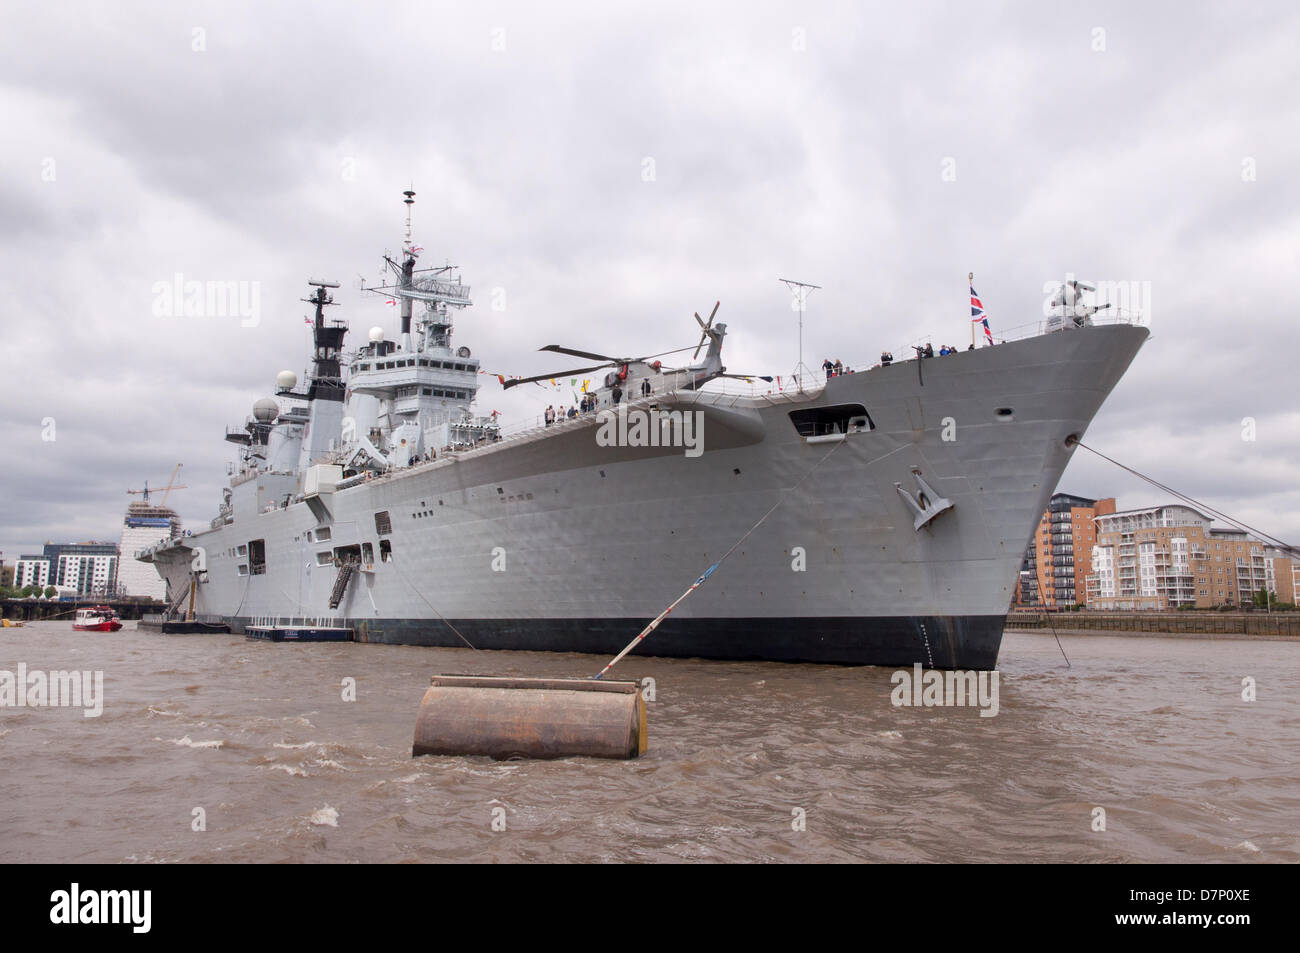 The River Thames, nr Greenwich, London, UK. 11th May 2013. HMS Illustrious, the Royal Navy's helicopter and Commando carrier, visiting London to commemorate the 70th anniversary of the 'Battle of the Atlantic'. Moored on the River Thames next to Greenwich on Saturday 11th May 2013. Credit: Craig Buchanan /Alamy Live News Stock Photo